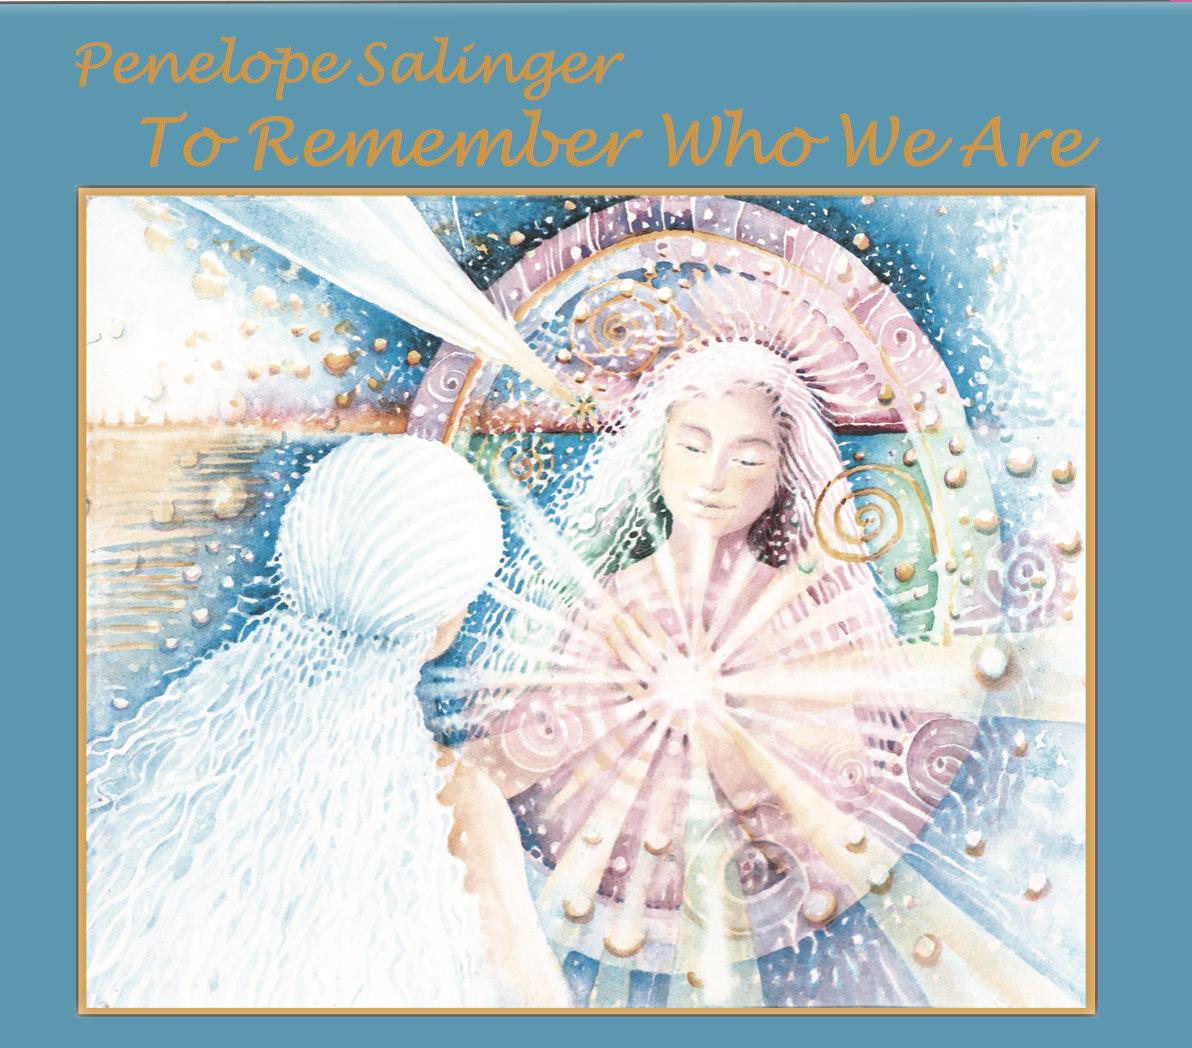 CD cover in pastel watercolors dominated by turquoise. A woman with long hair is facing an image of another woman with rays coming from her heart.